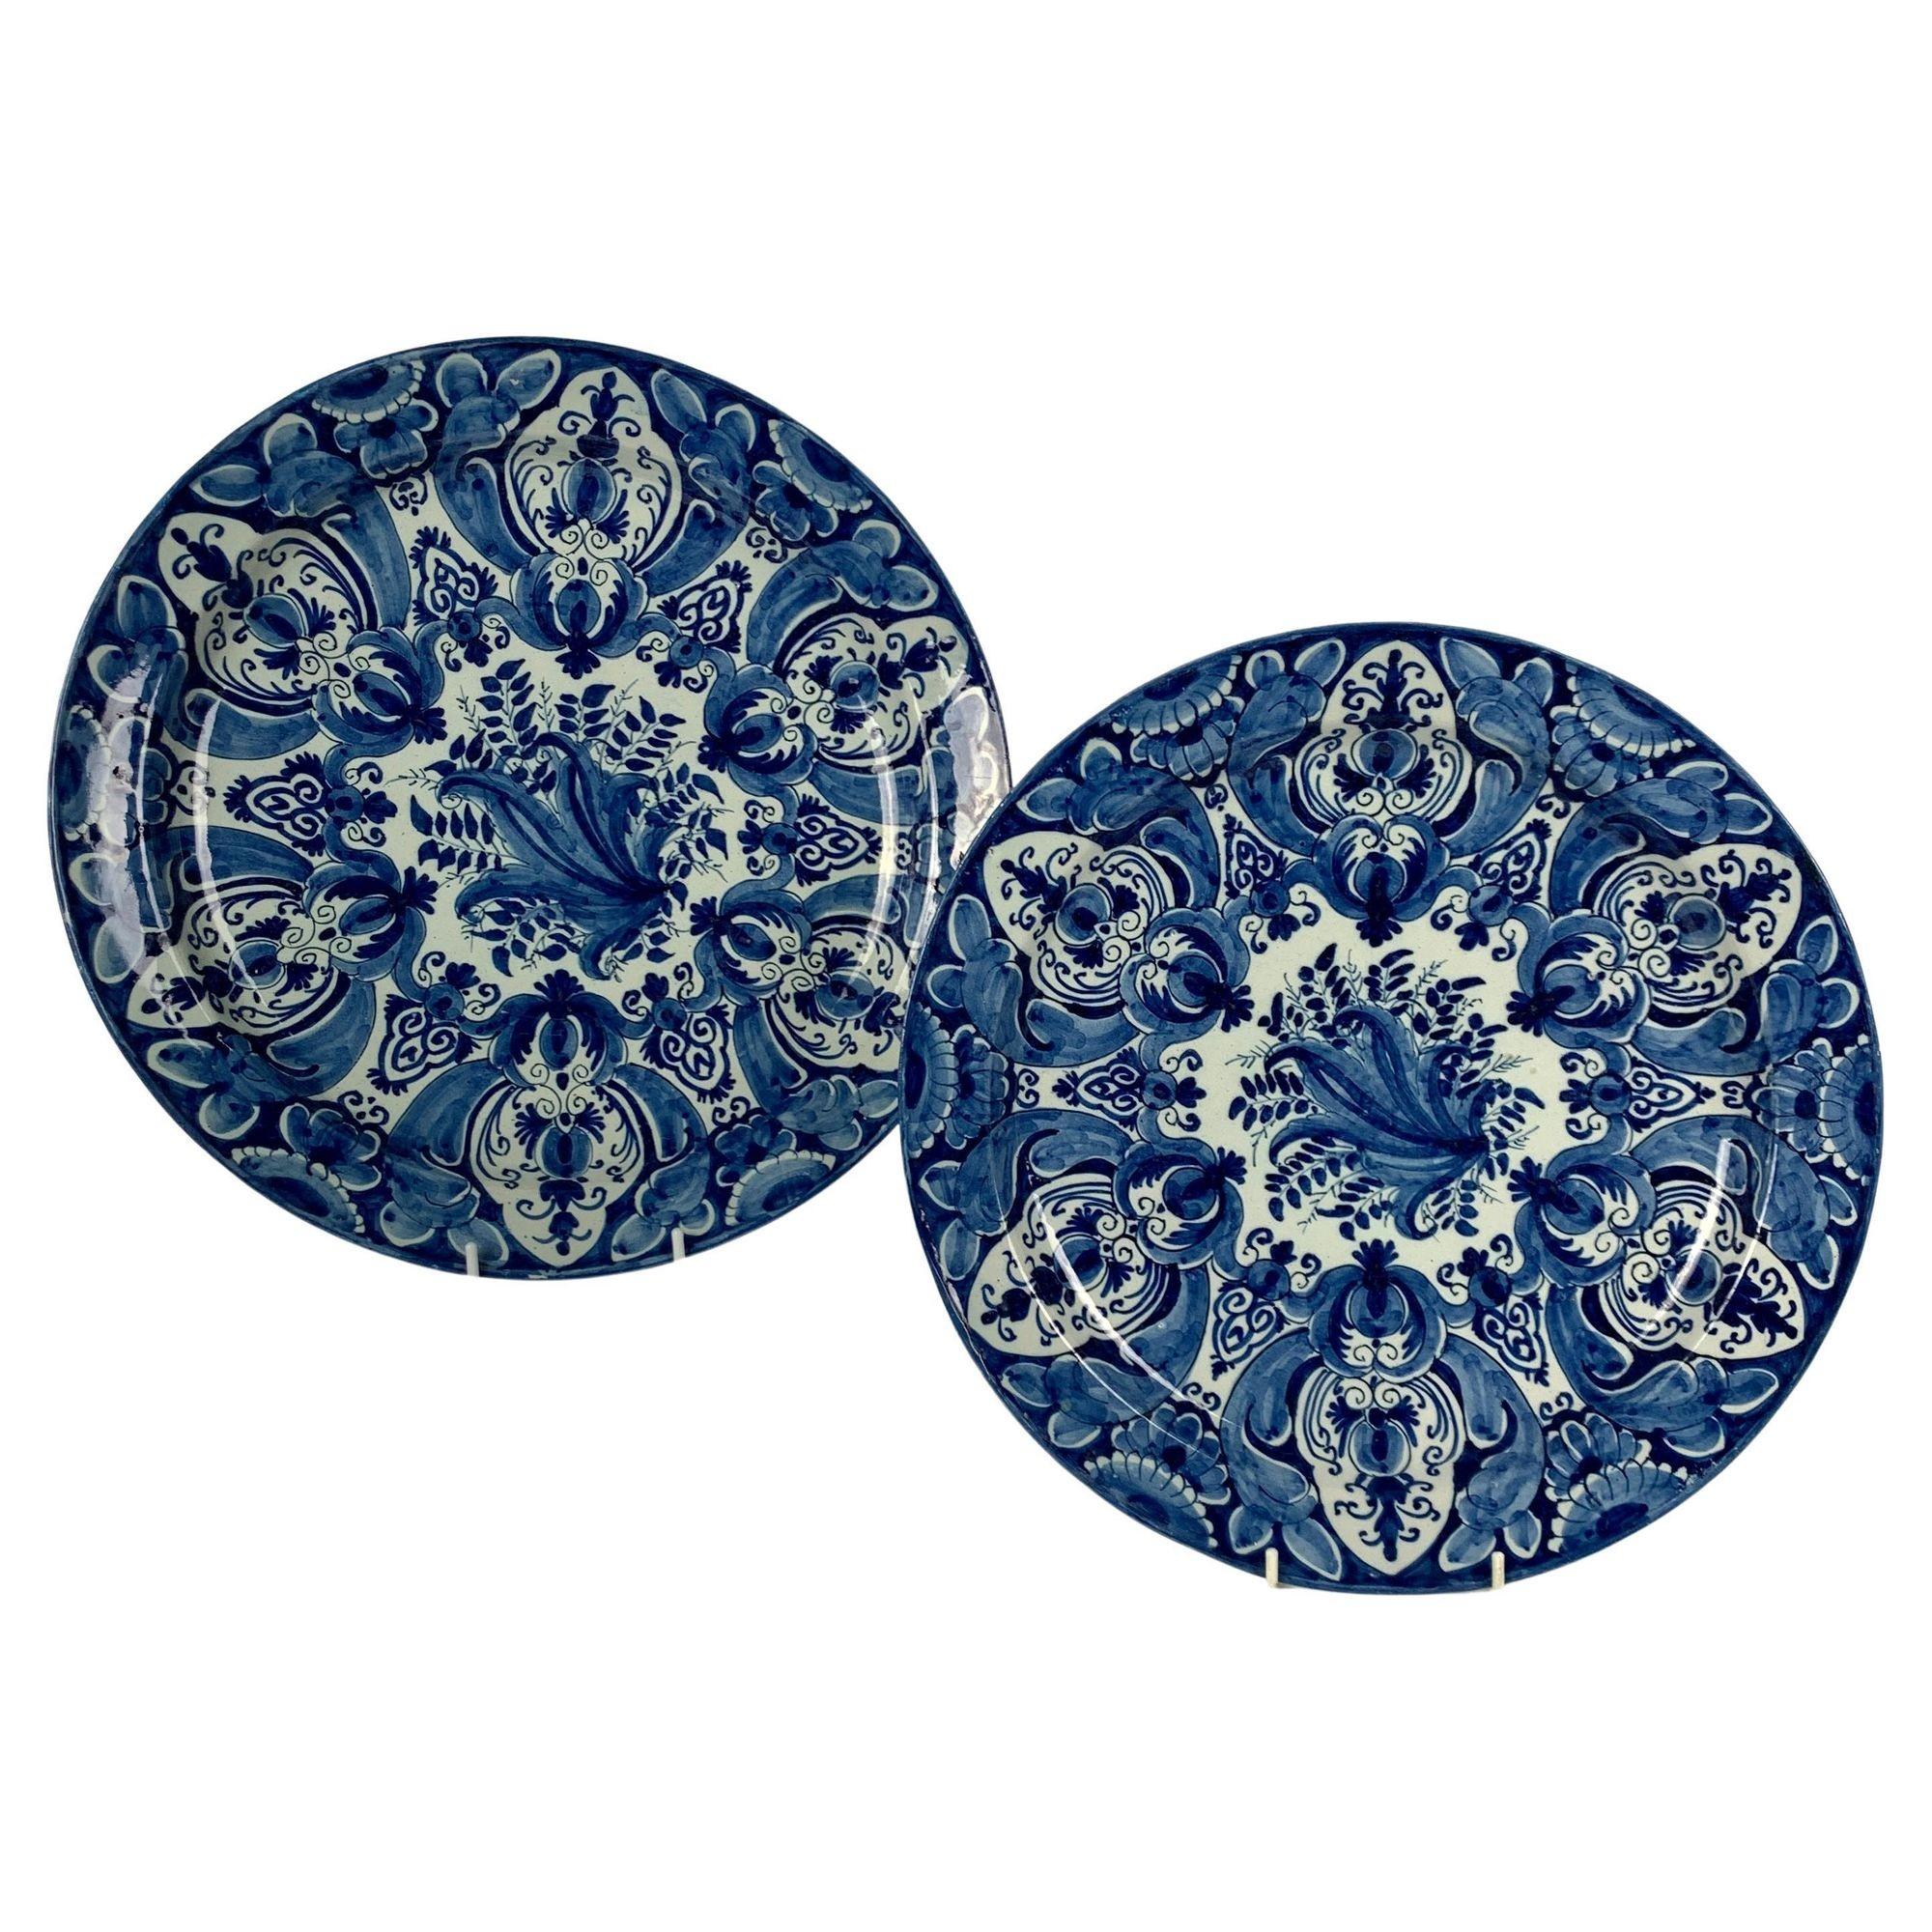 This group of blue and white Delft chargers has beautiful deep cobalt blue coloring.
The white tin glaze is relatively uniform in its color.
The sizes, colors, and designs make a harmonious group.
The chargers were hand-painted between 1760 to